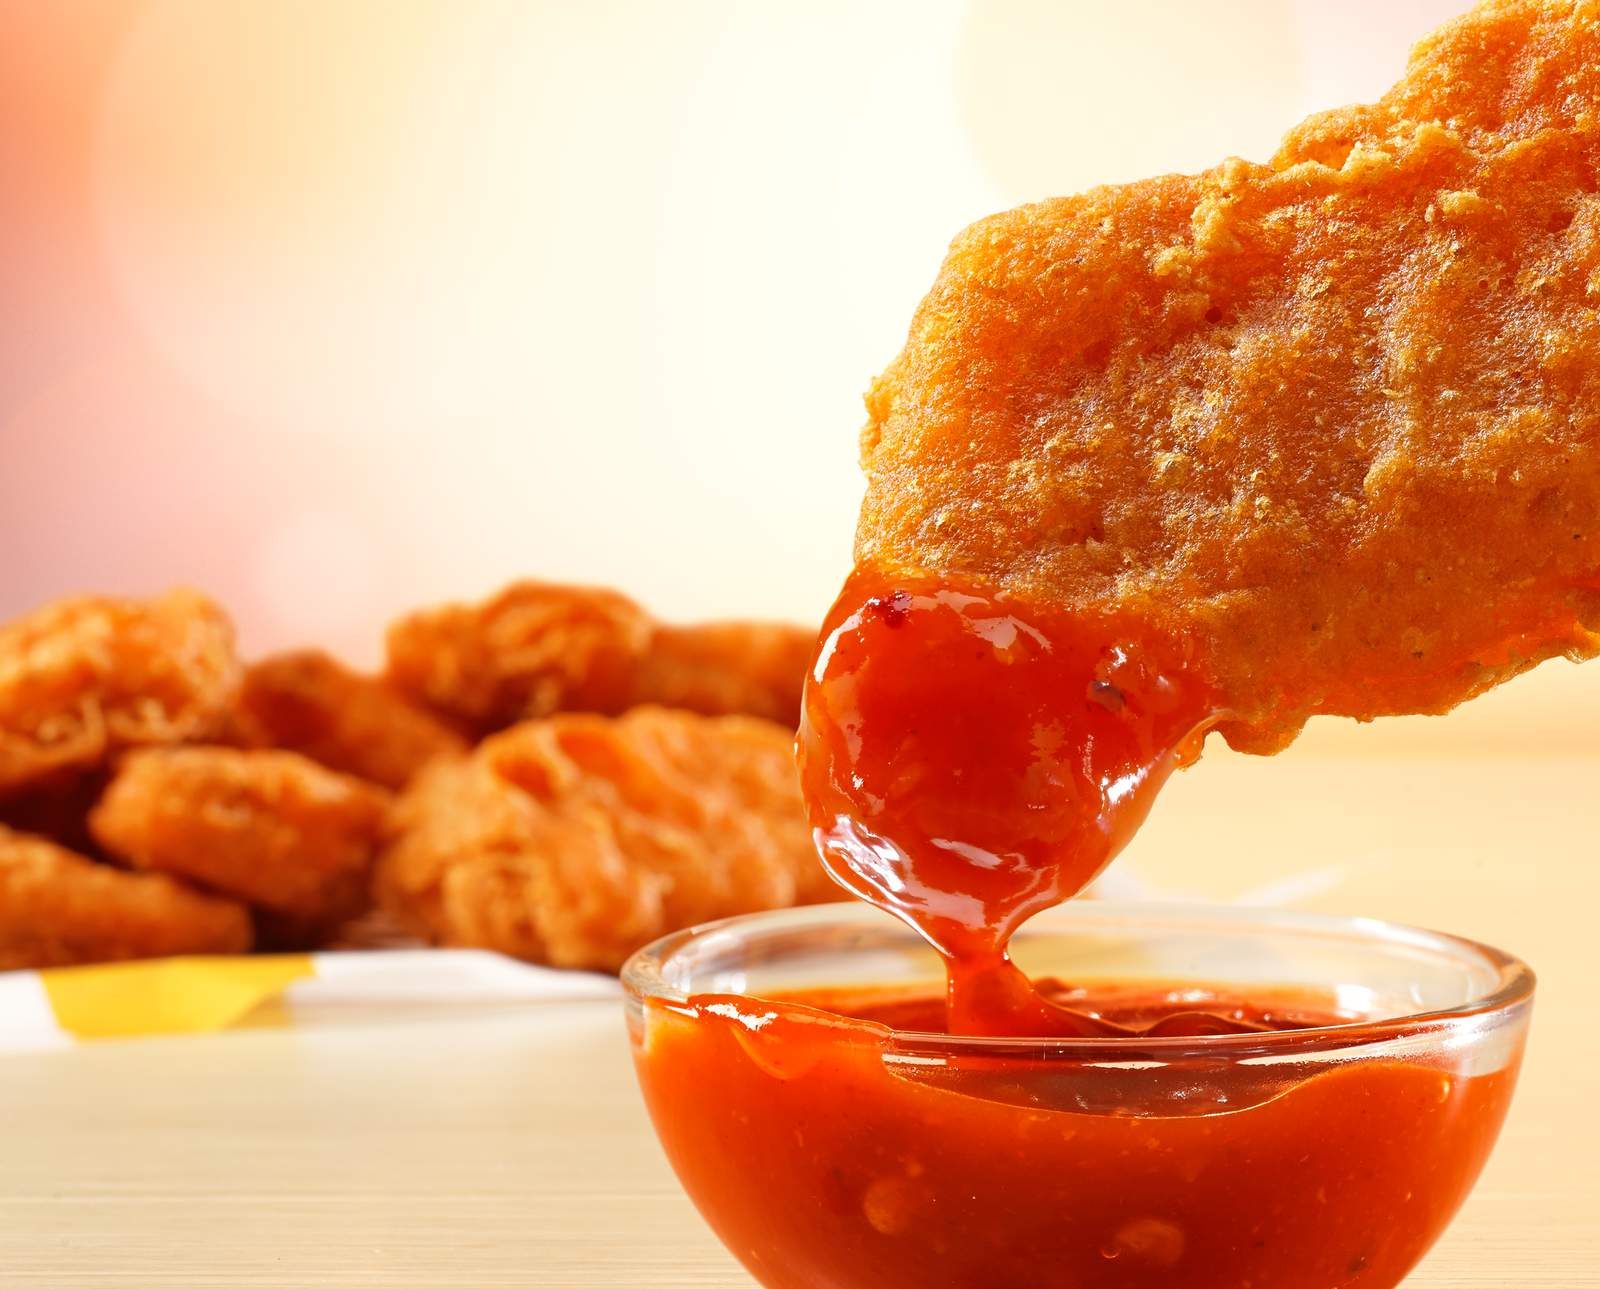 McDonald’s Spicy Chicken McNuggets are back on the menu for a limited time